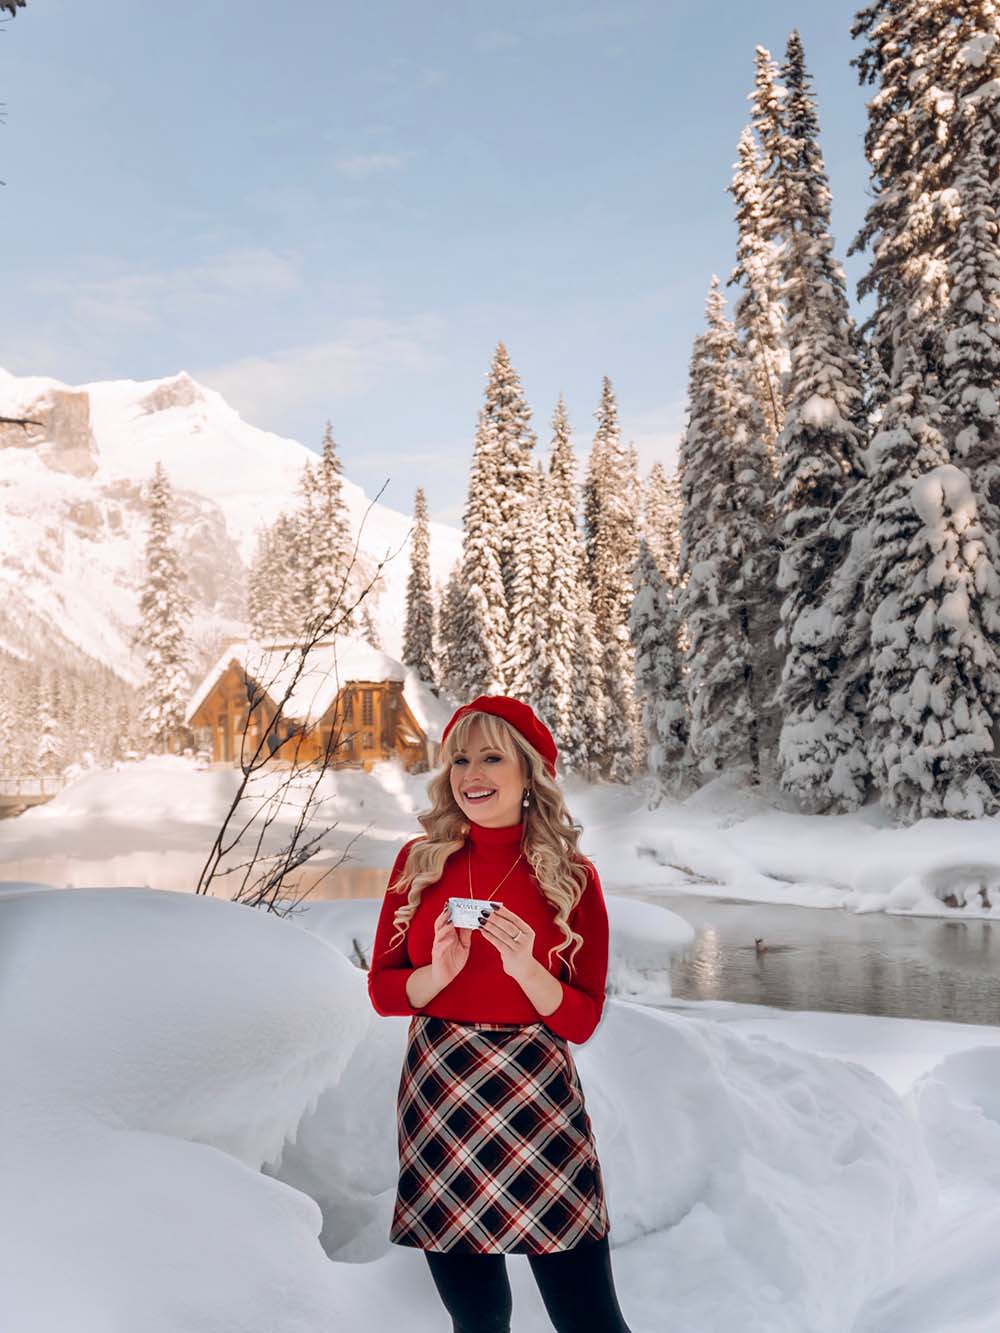 Banff is absolutely incredible. Although most people visit Banff when the weather is warmer, it's absolutely magical to visit in winter. Here's a local's guide to some of the best things to do in in Banff in winter. From hikes and trails to winter sports, family friendly excursions, dining experiences and more. You won't want to miss this guide that will surely convince you to add Banff in winter to your travel bucket list. Pictured here: Take a day trip to Emerald Lake